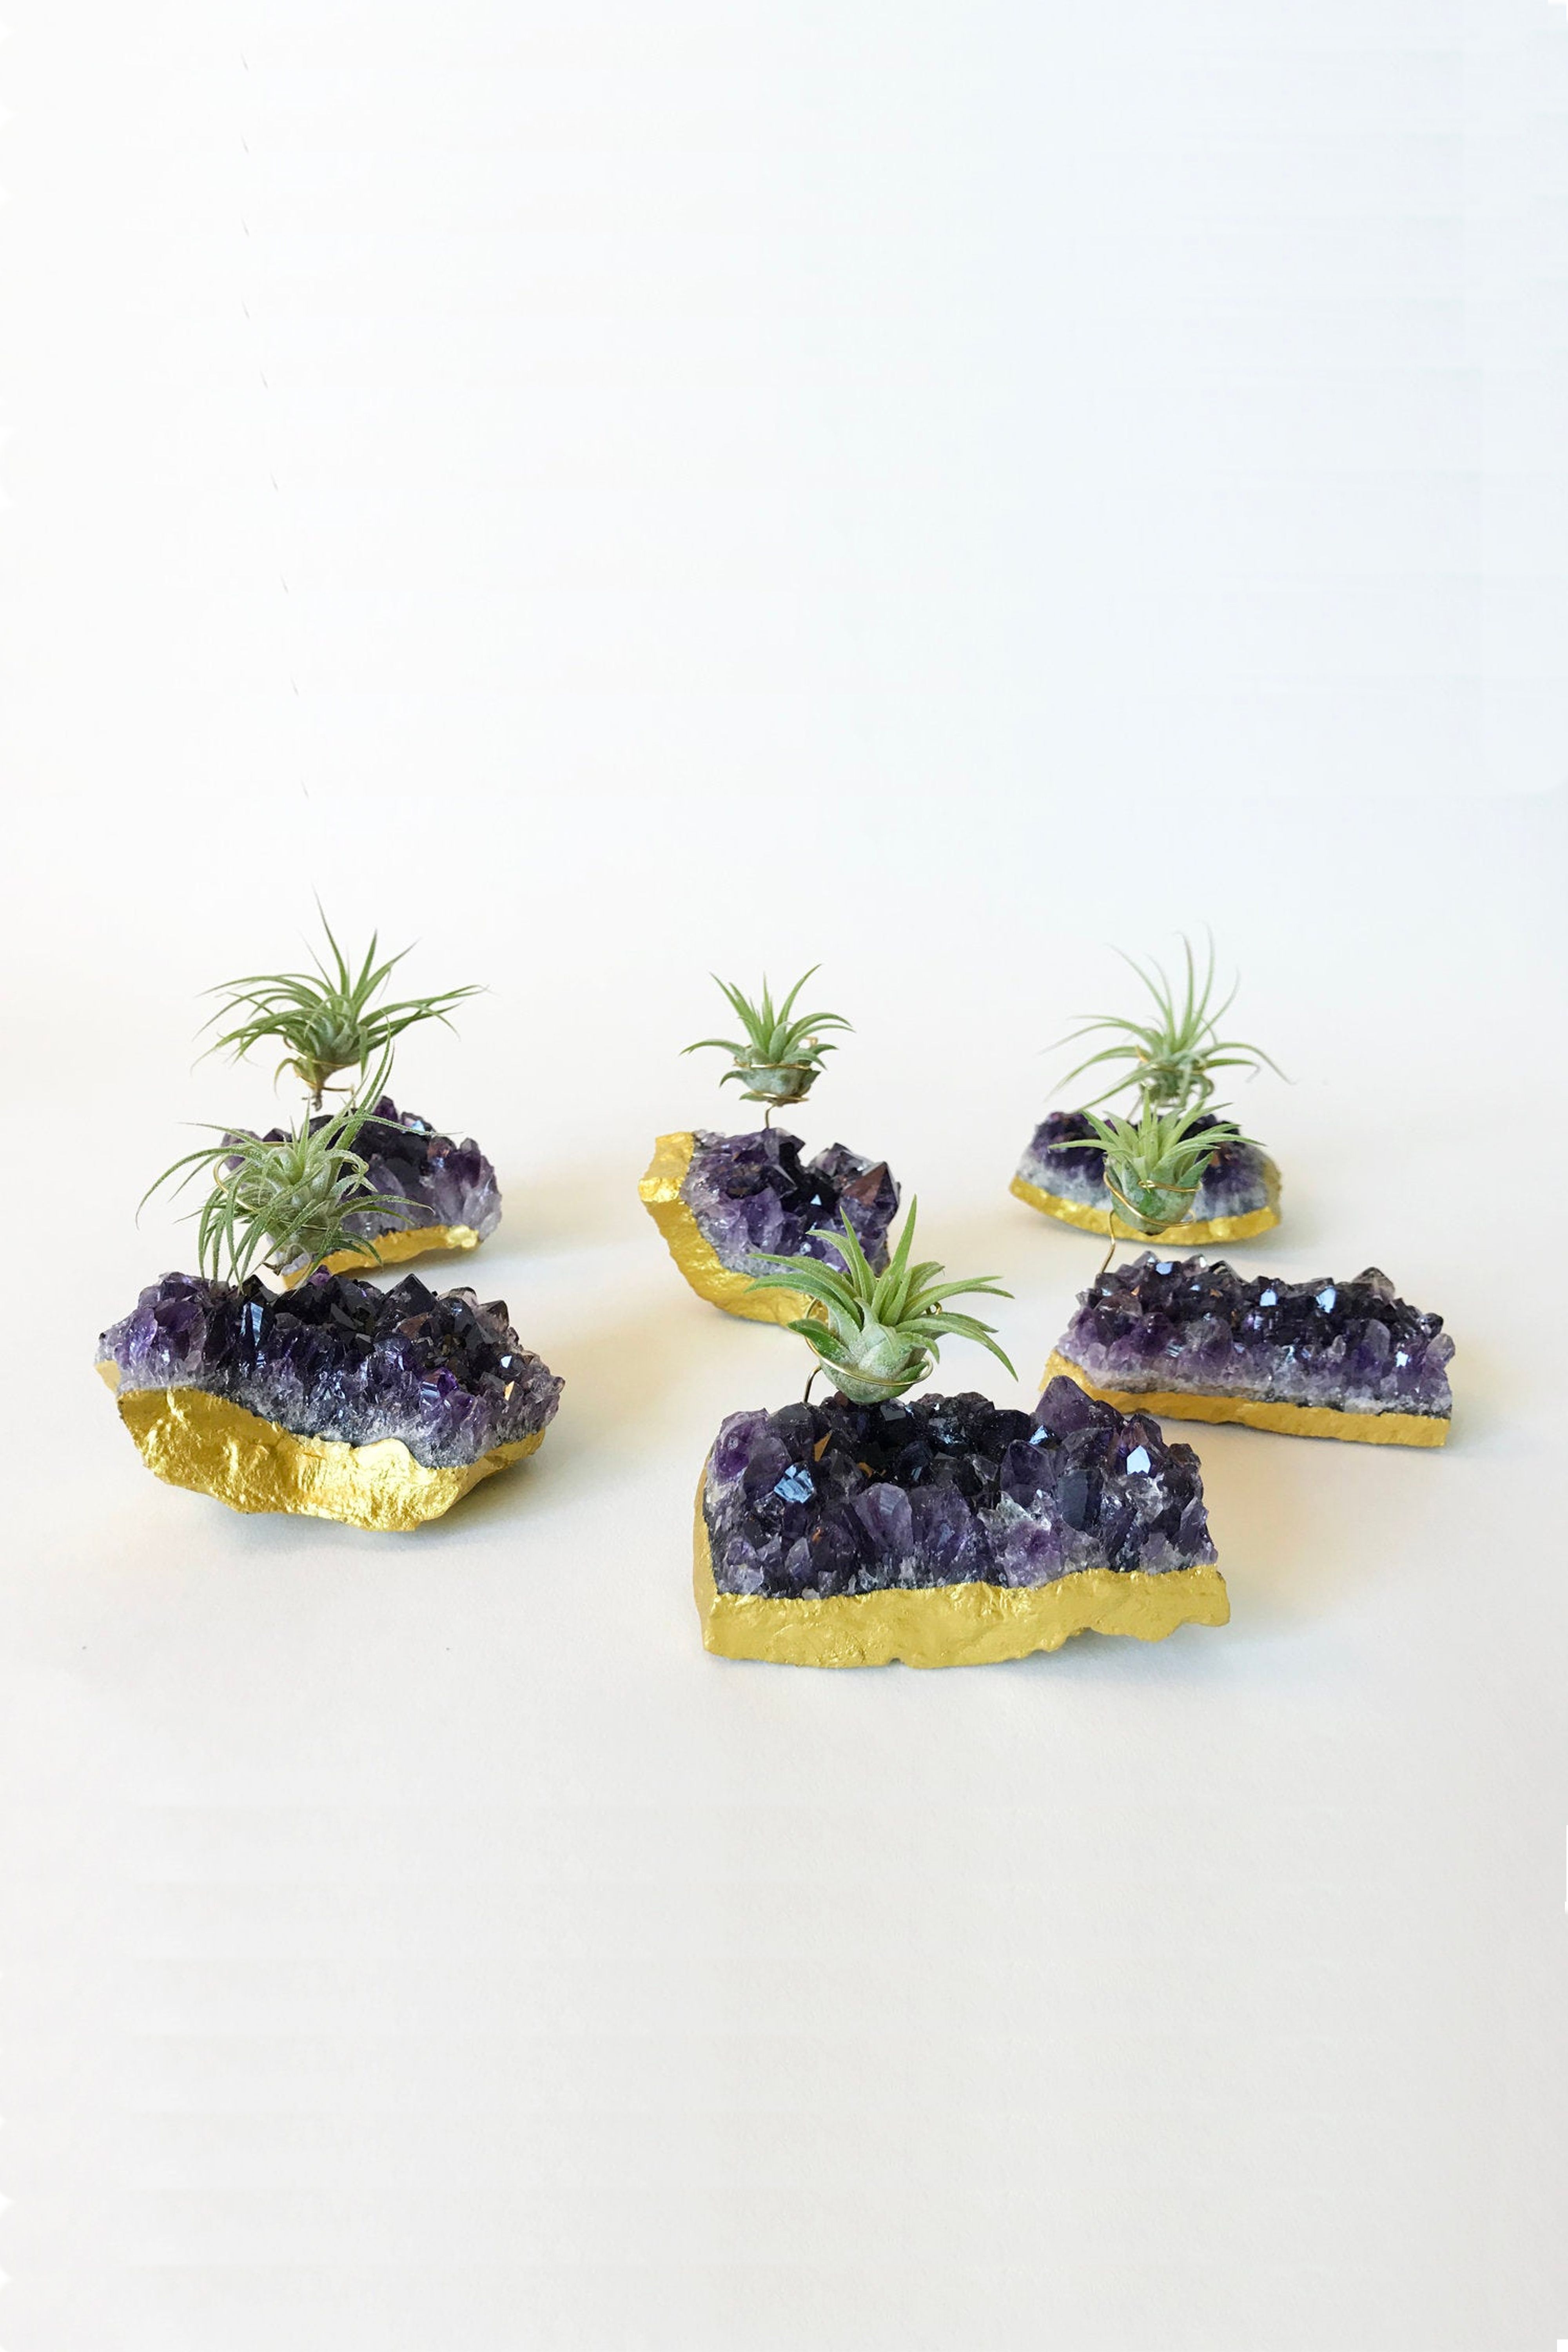 4 Pieces Tillandsia Air Plant Crystals Holder Small Air Plant Pot for Air Plants Home Decor Display Air Plant Not Include 